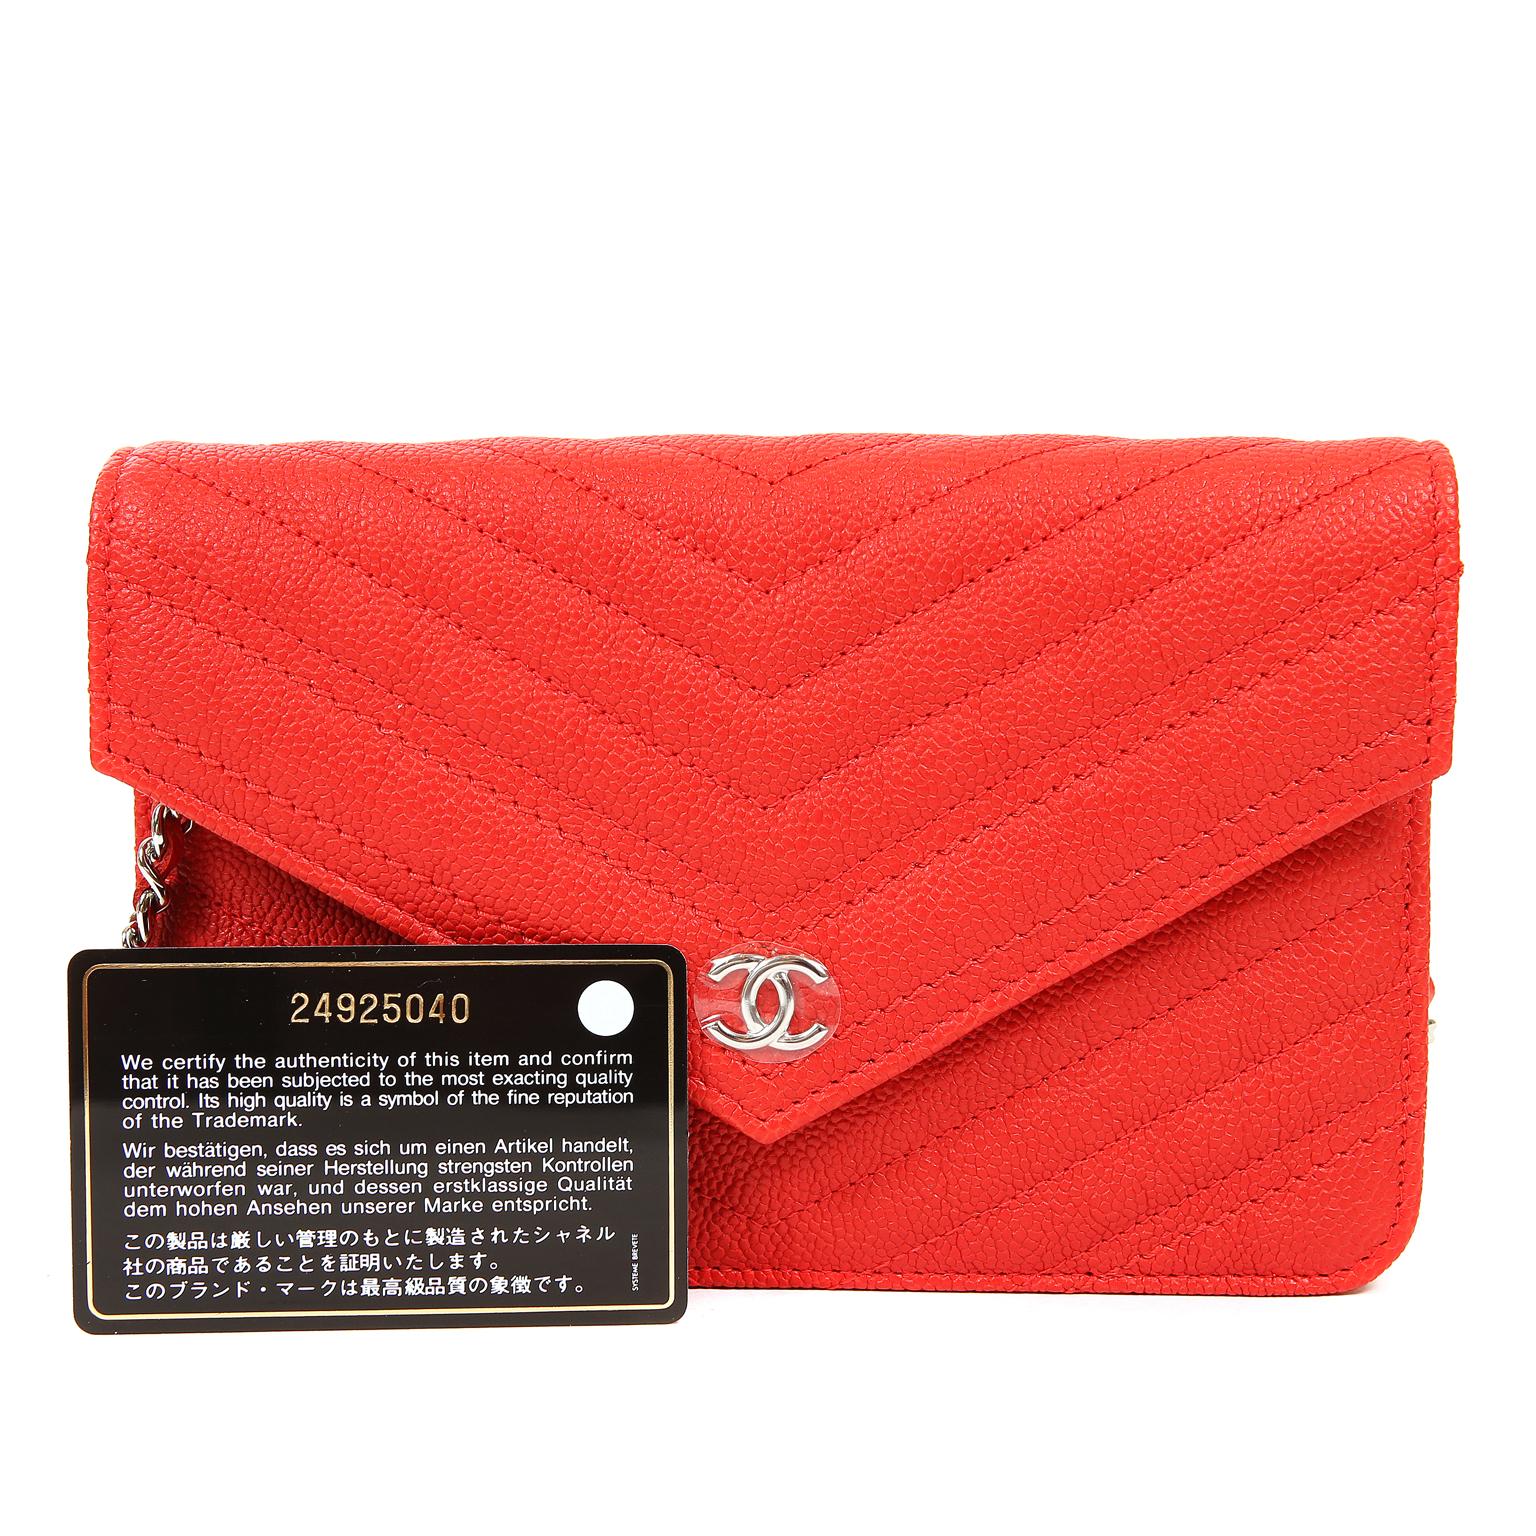 Chanel Red Caviar WOC Wallet on a Chain 9